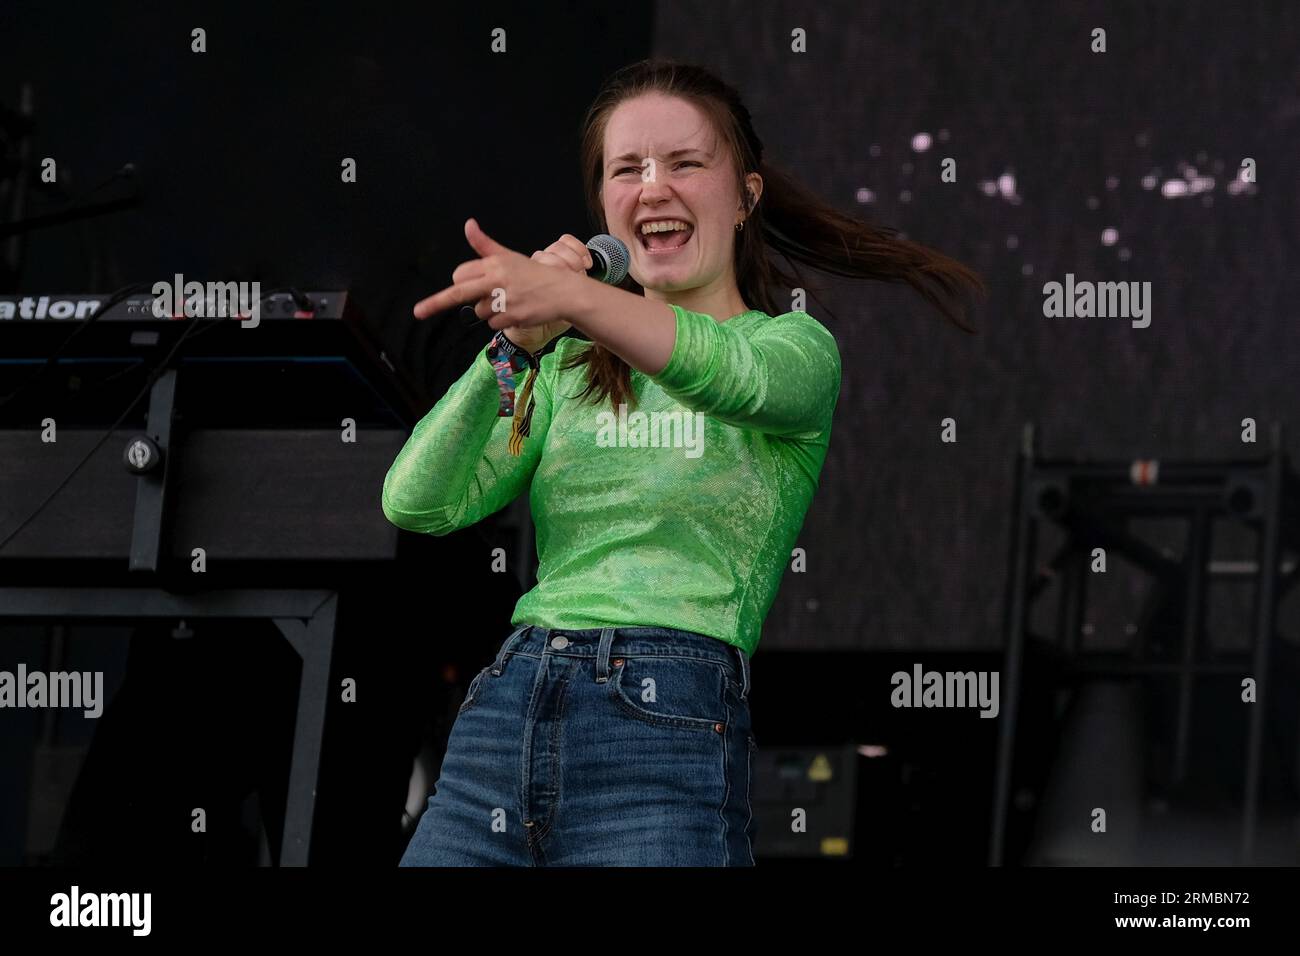 Portsmouth, UK. 27th Aug, 2023. Norwegian singer songwriter and Scandipop artist Sigrid Solbakk Raabe, Norwegian charts number one and number two in the UK album charts, performing live on stage at Victorious festival. (Photo by Dawn Fletcher-Park/SOPA Images/Sipa USA) Credit: Sipa USA/Alamy Live News Stock Photo